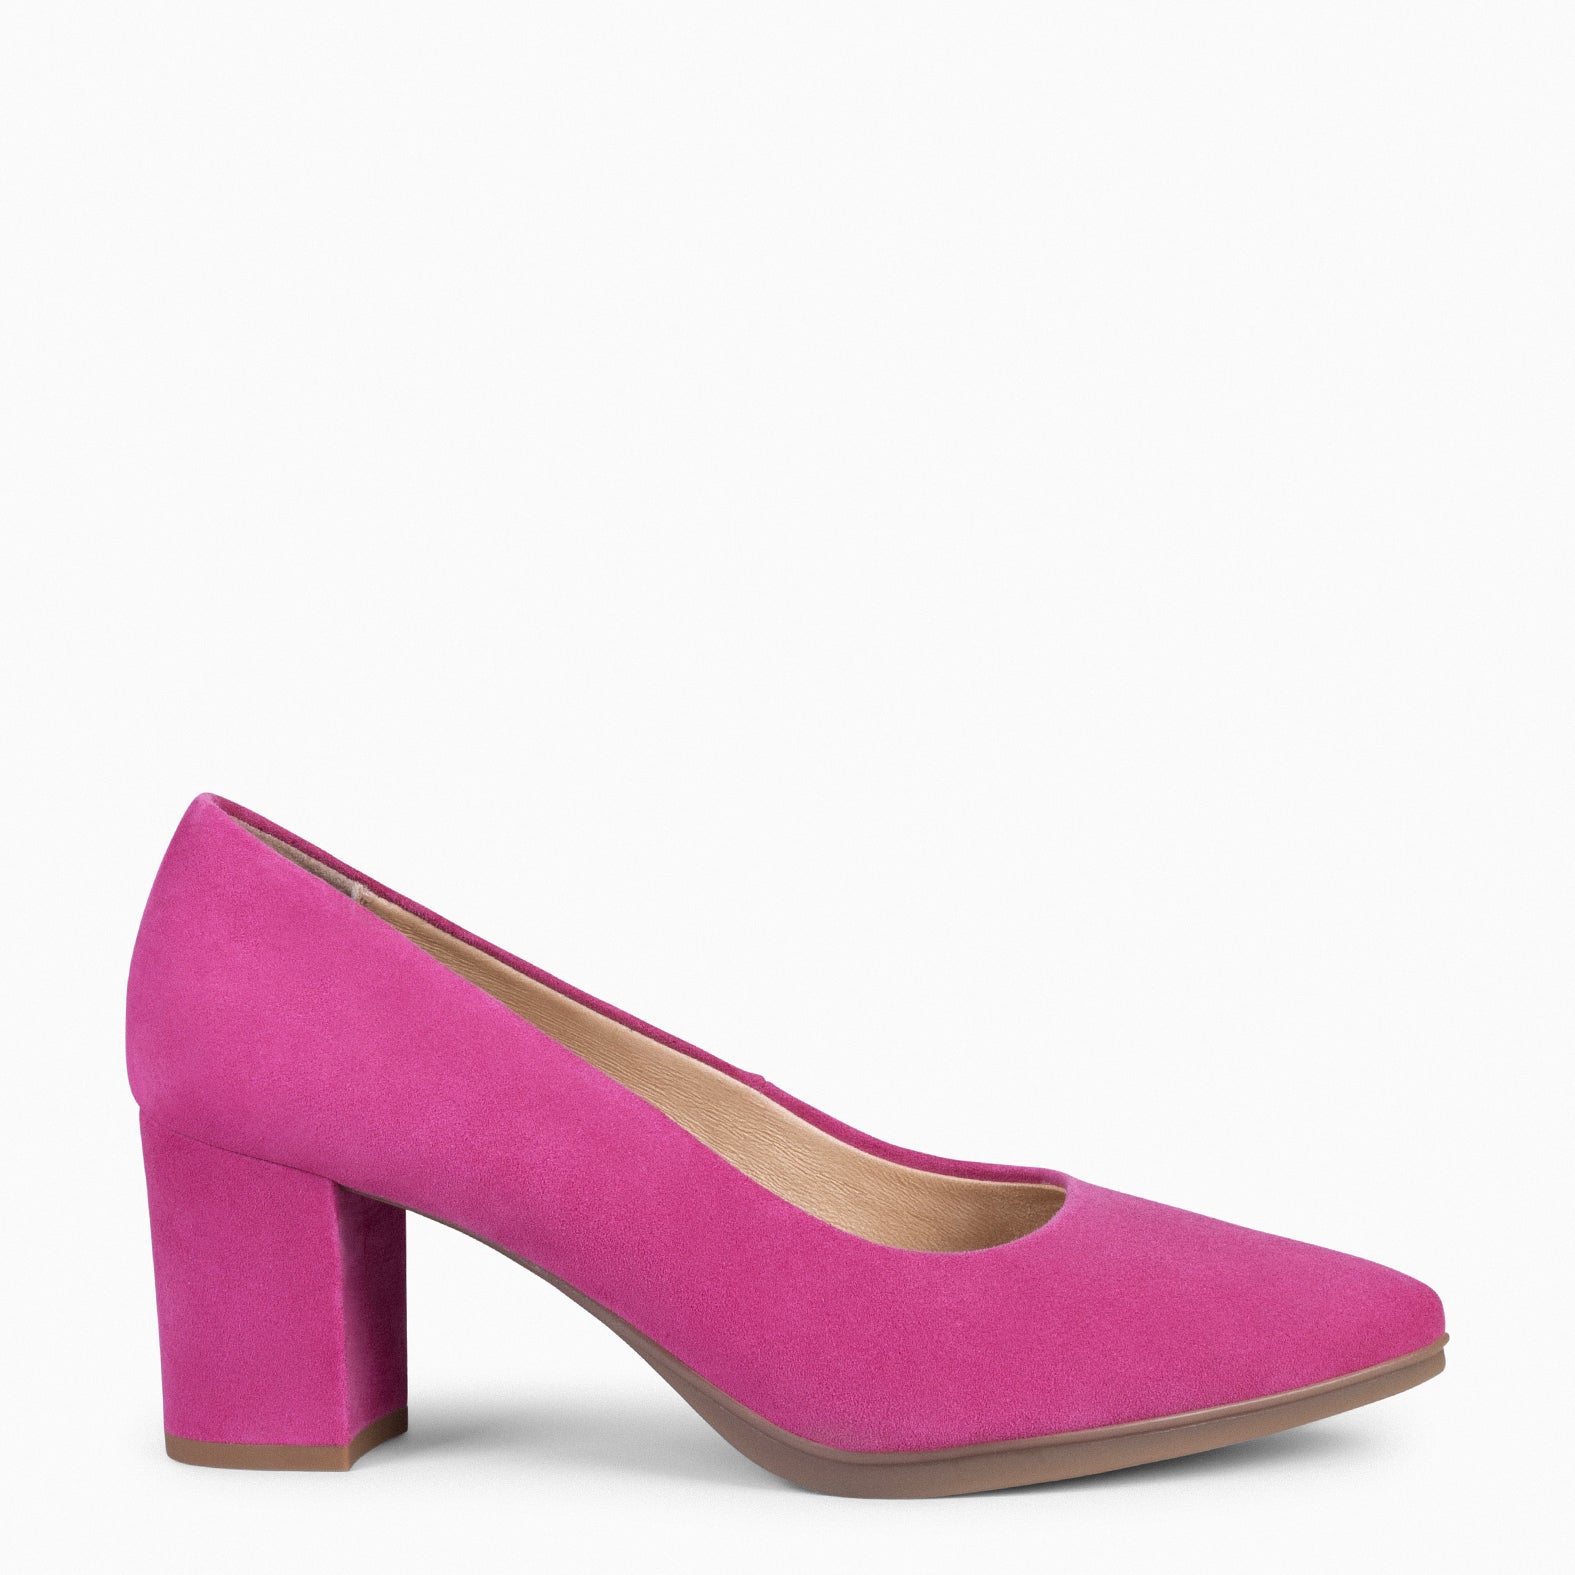 URBAN S – FUCHSIA Suede Mid-Heeled Shoes 